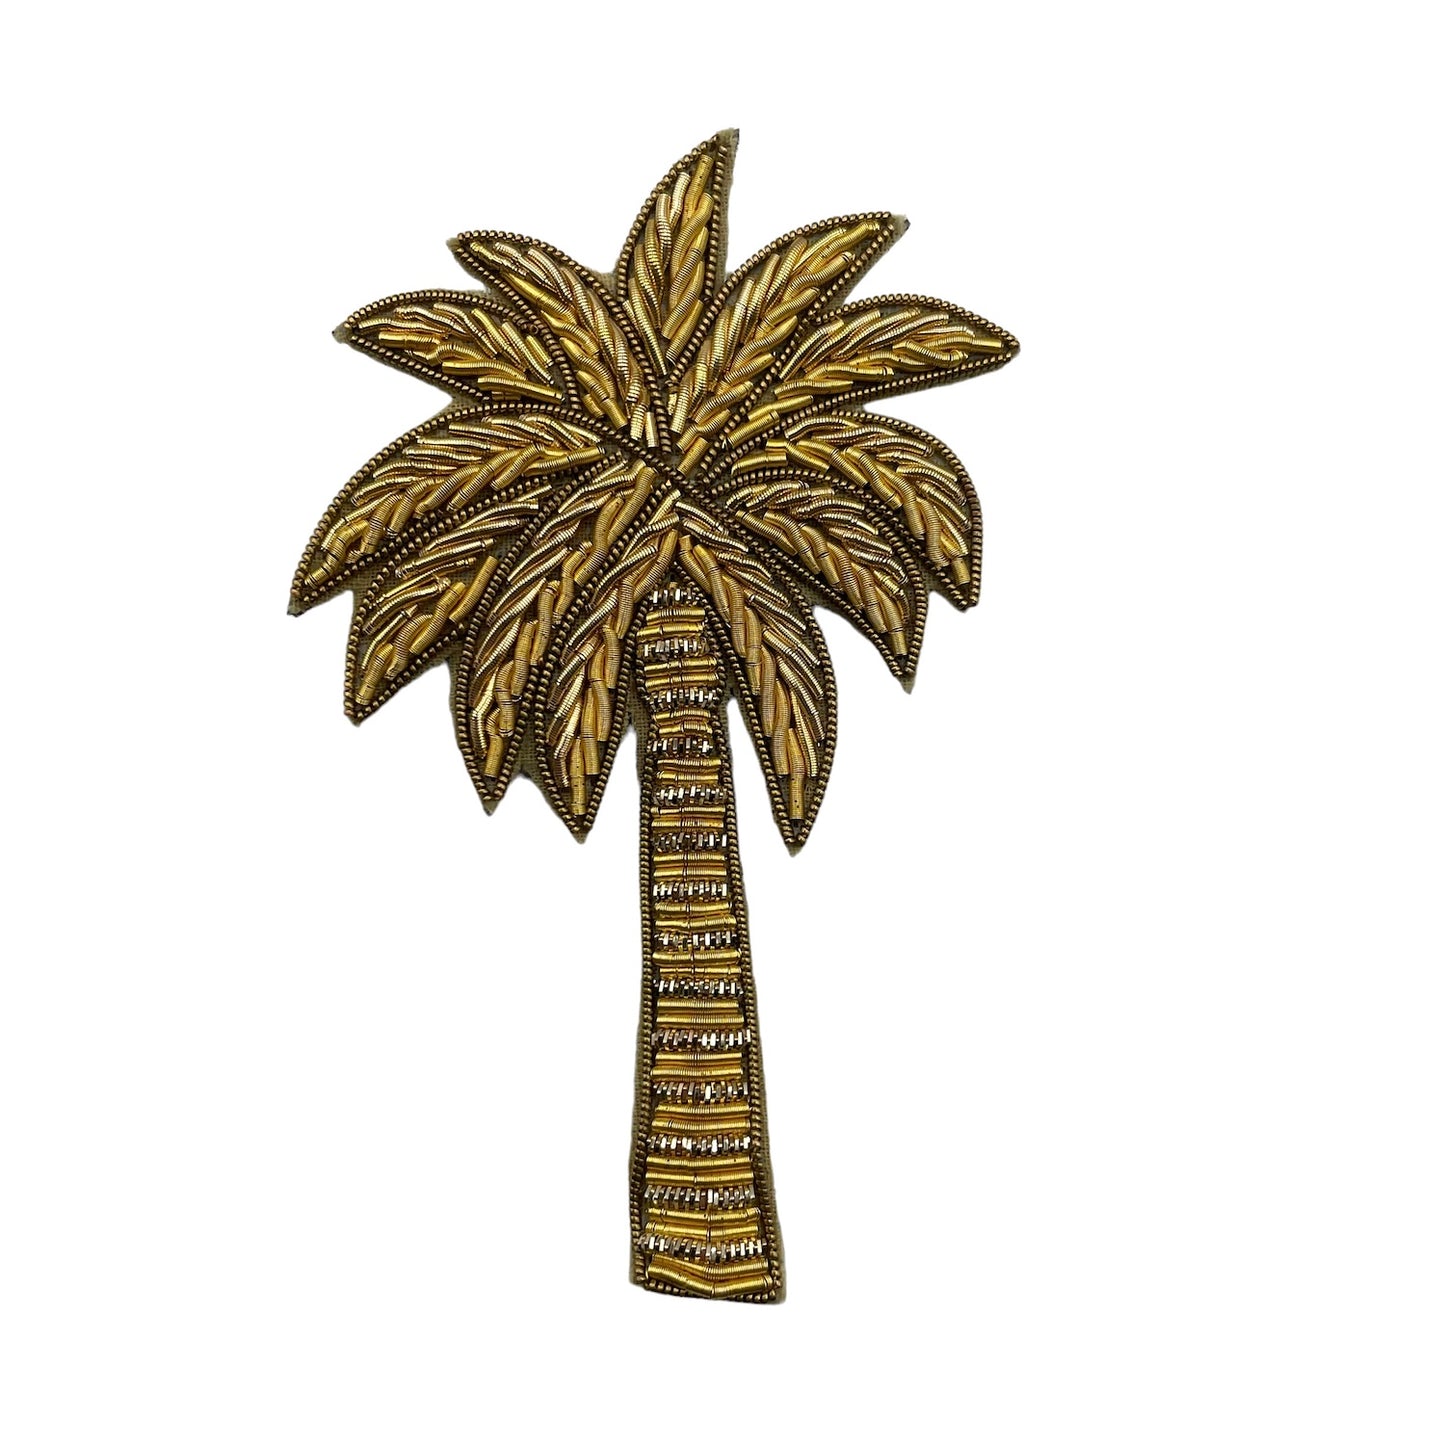 Marine make-up bag & gold palm tree brooch - recycled velvet, large and small